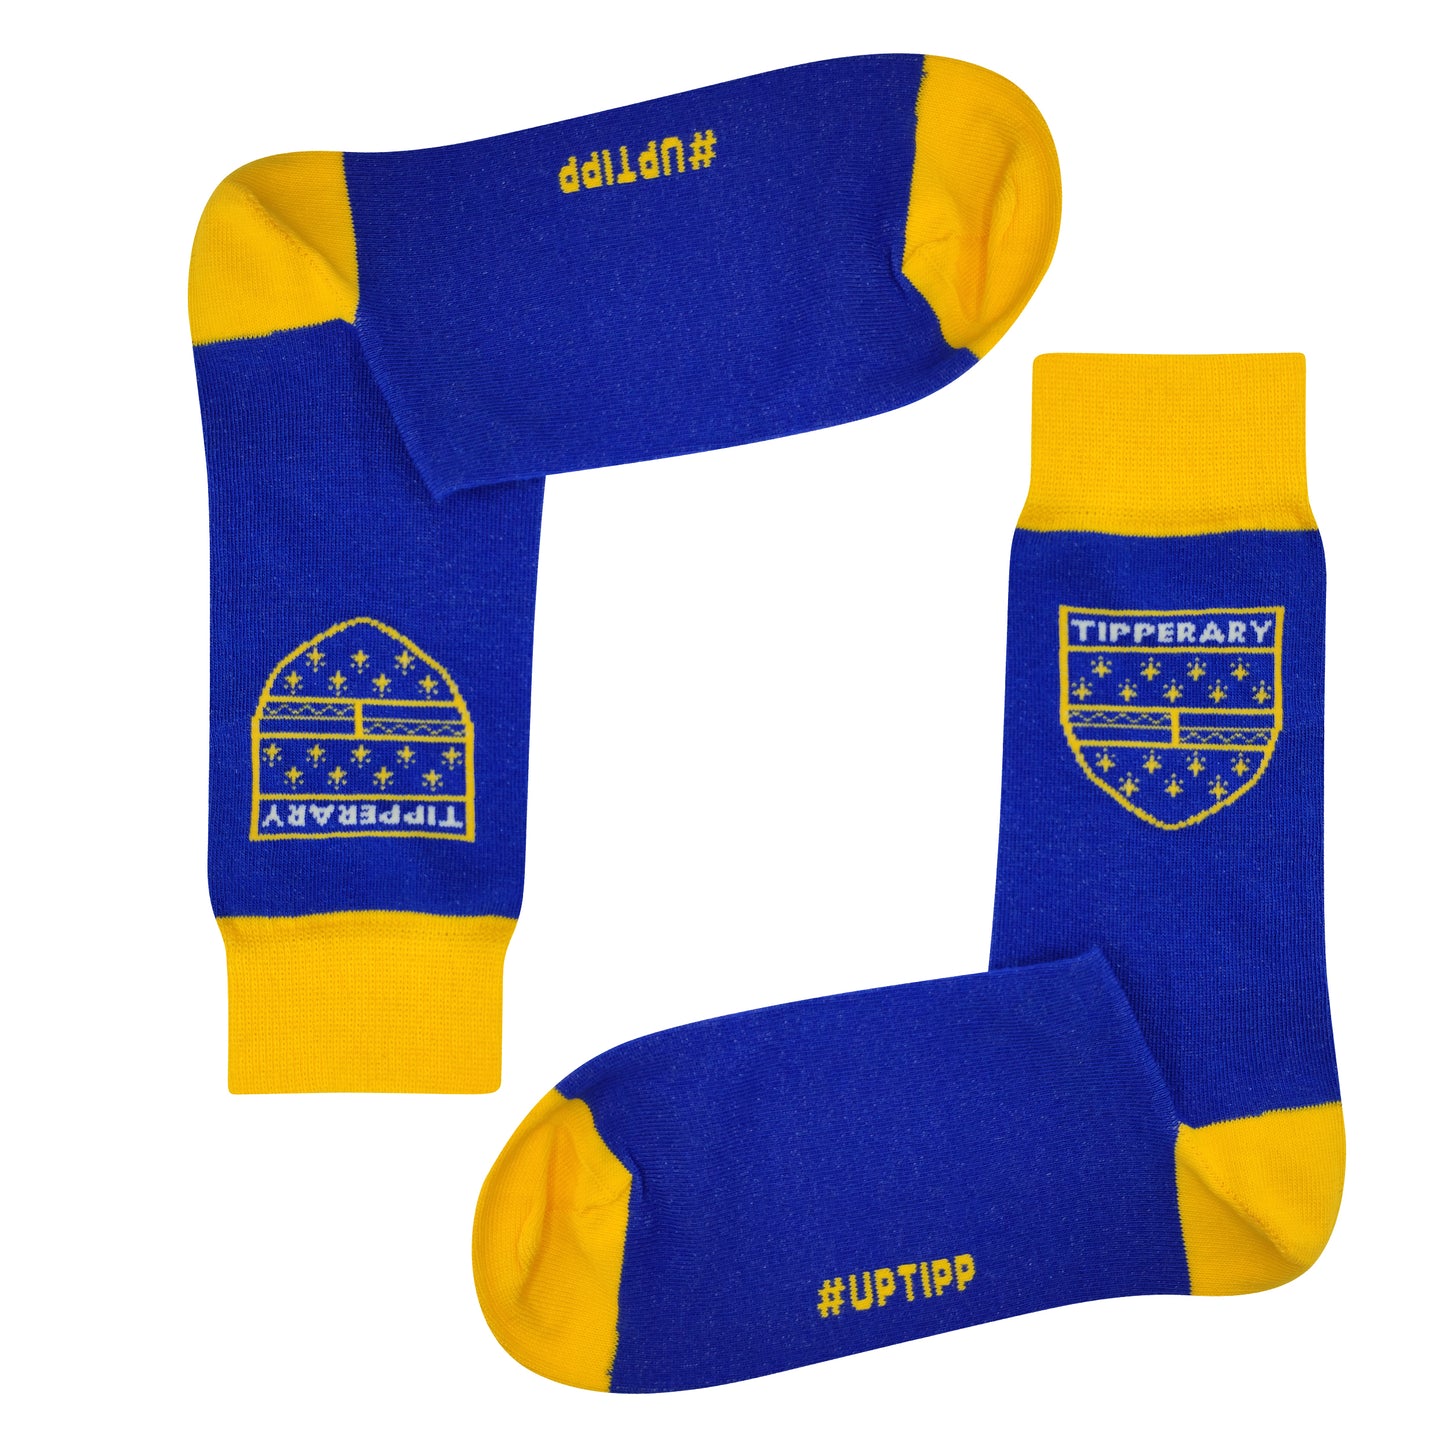 Tipperary Retro Sock Gift Box | Signed By Padraic Maher | Size UK 7 - 11